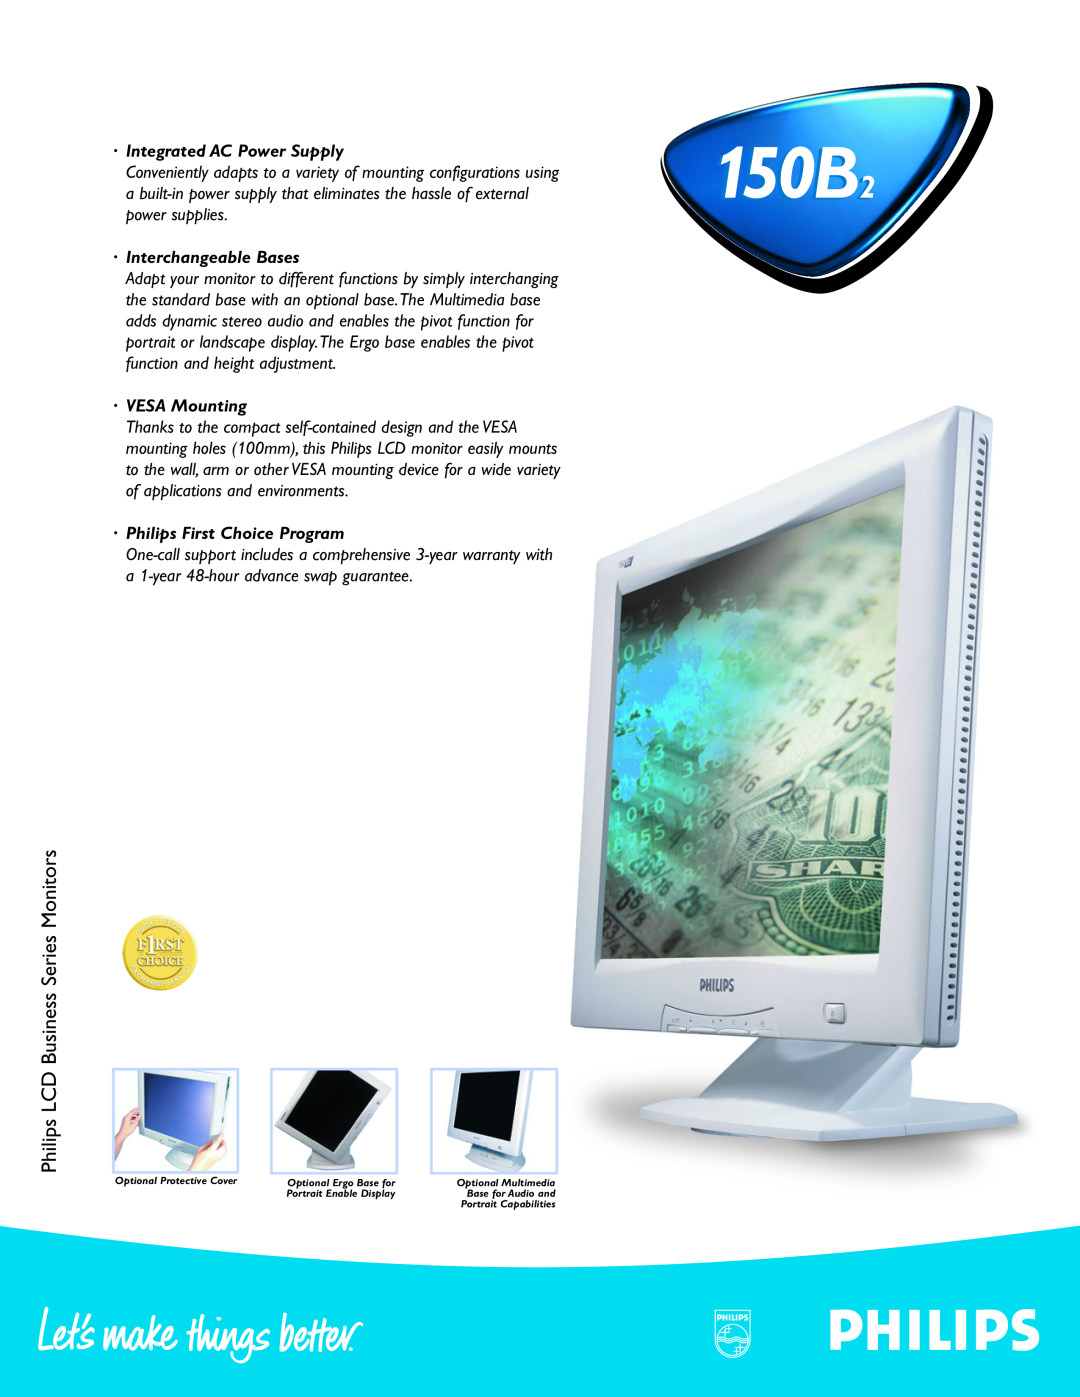 Philips 150B2 warranty Philips LCD Business Series Monitors, · Integrated AC Power Supply, ·Interchangeable Bases 